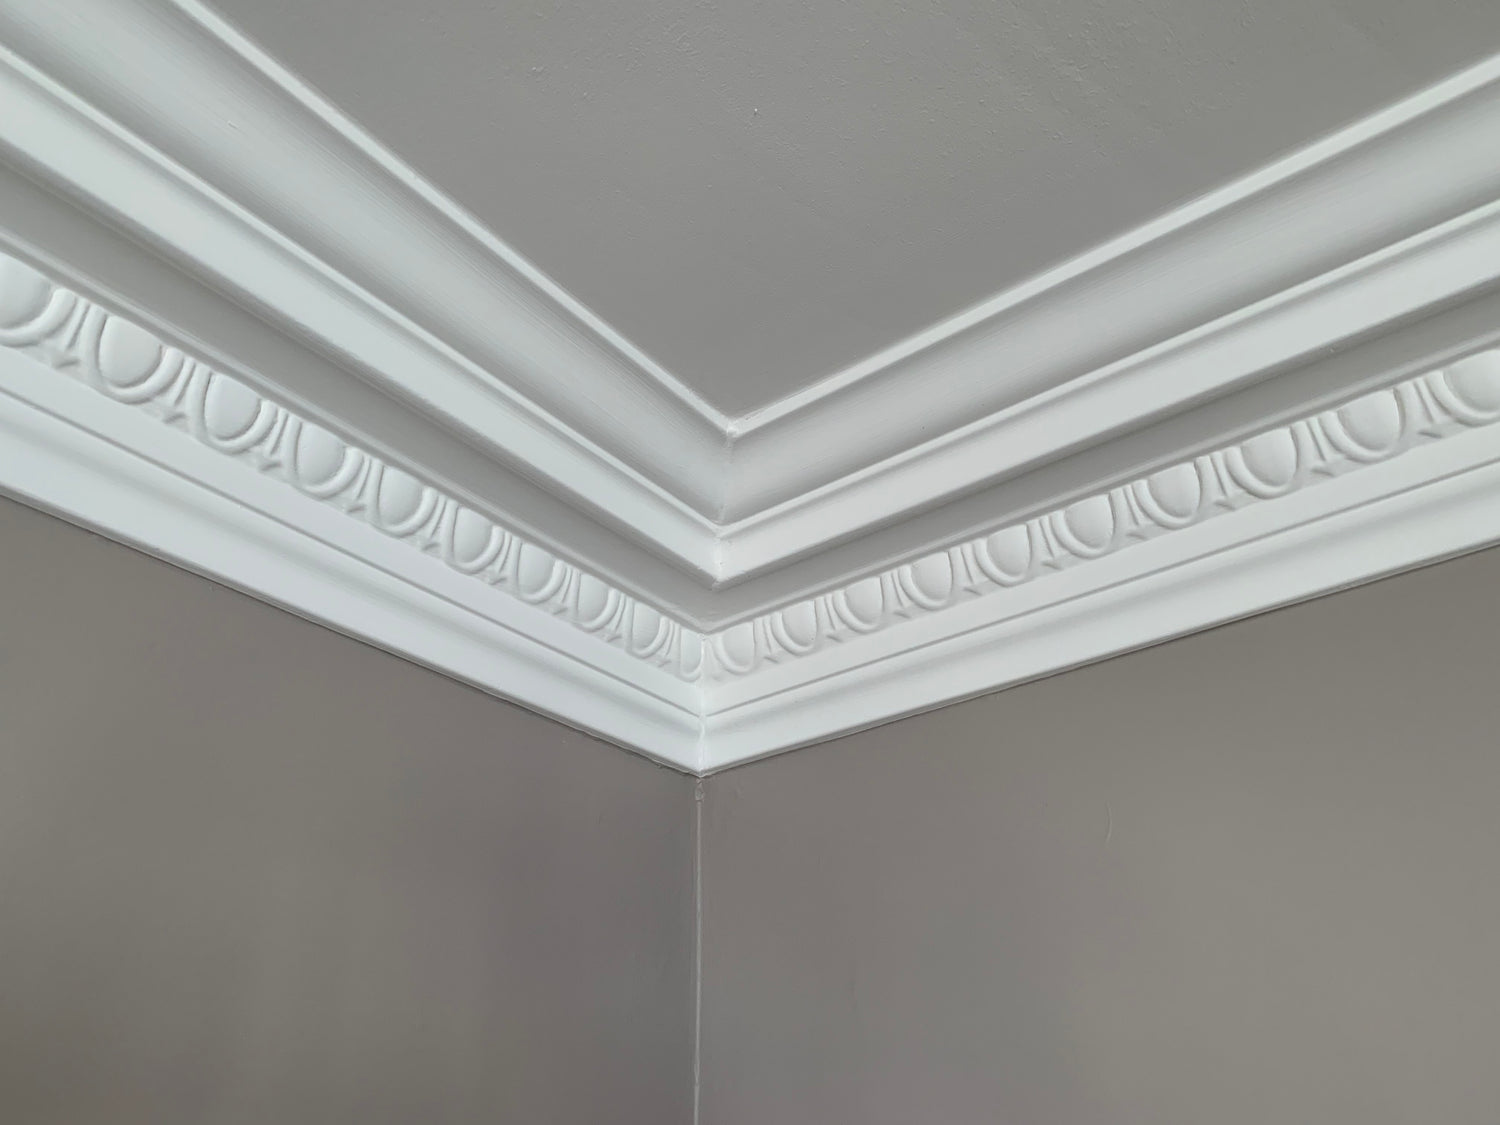 The corner of an installed Egg & Dart - Classic Coving